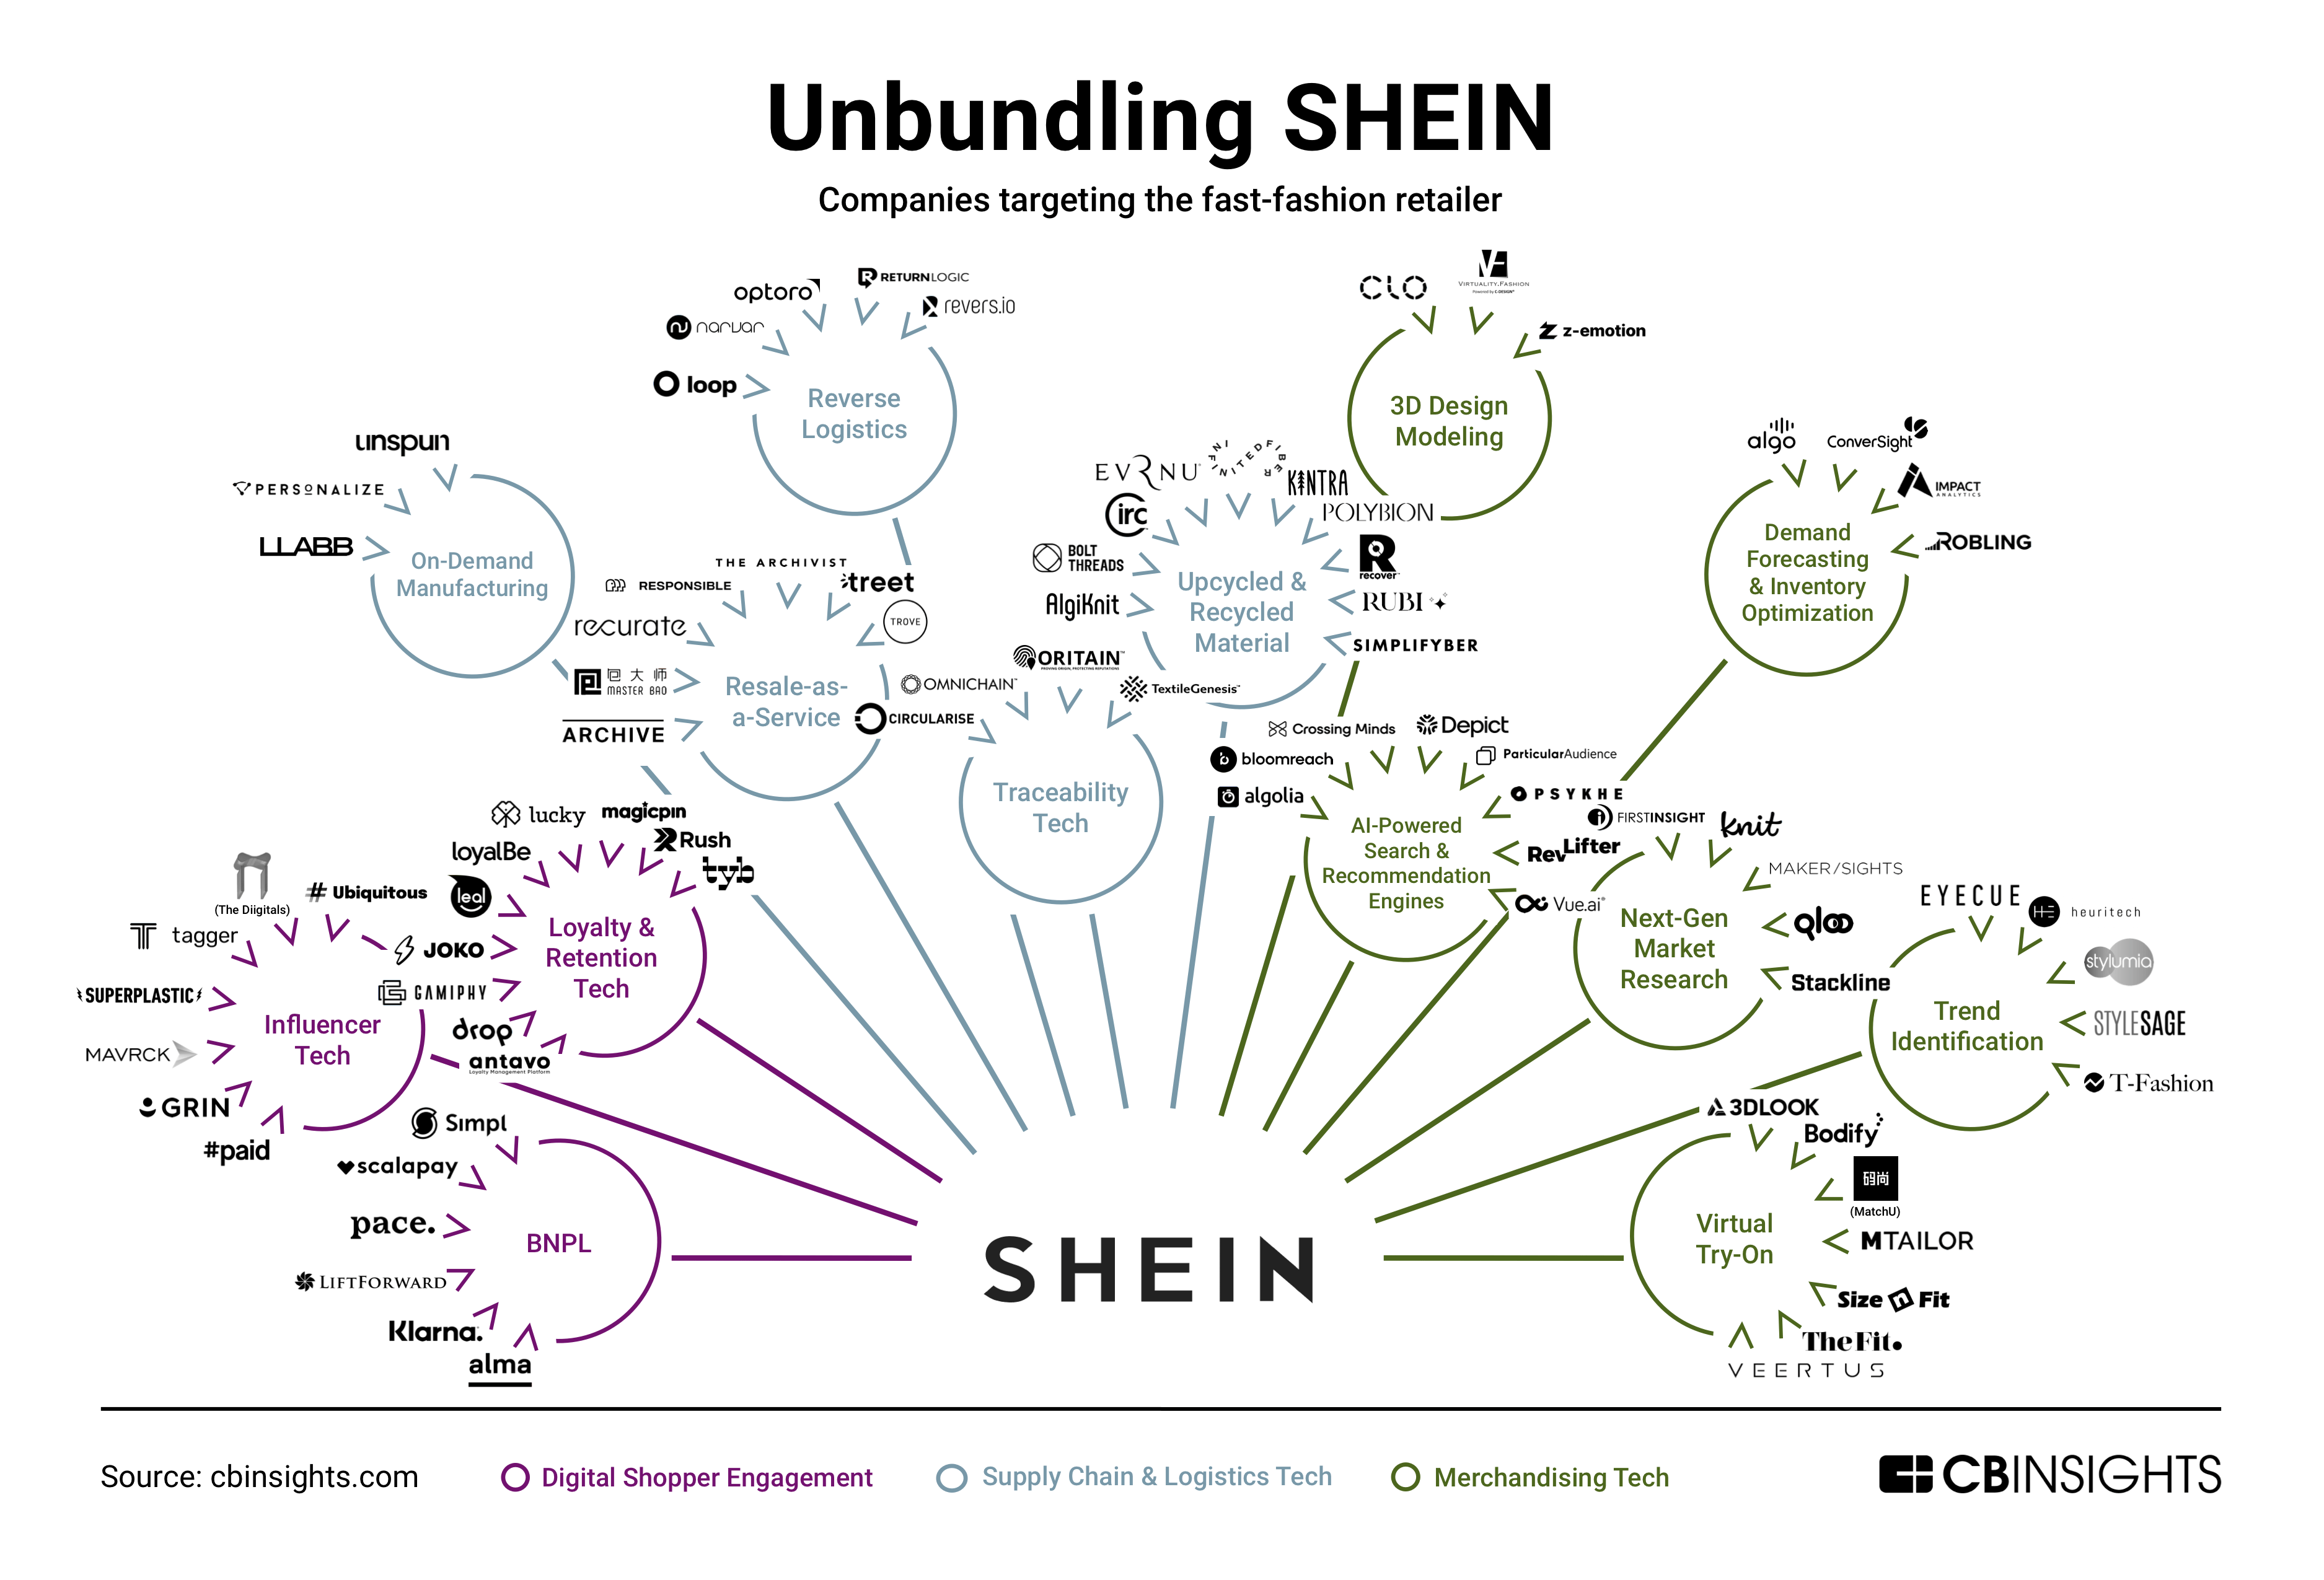 Unbundling SHEIN: How fast fashion is being disrupted - CB Insights Research